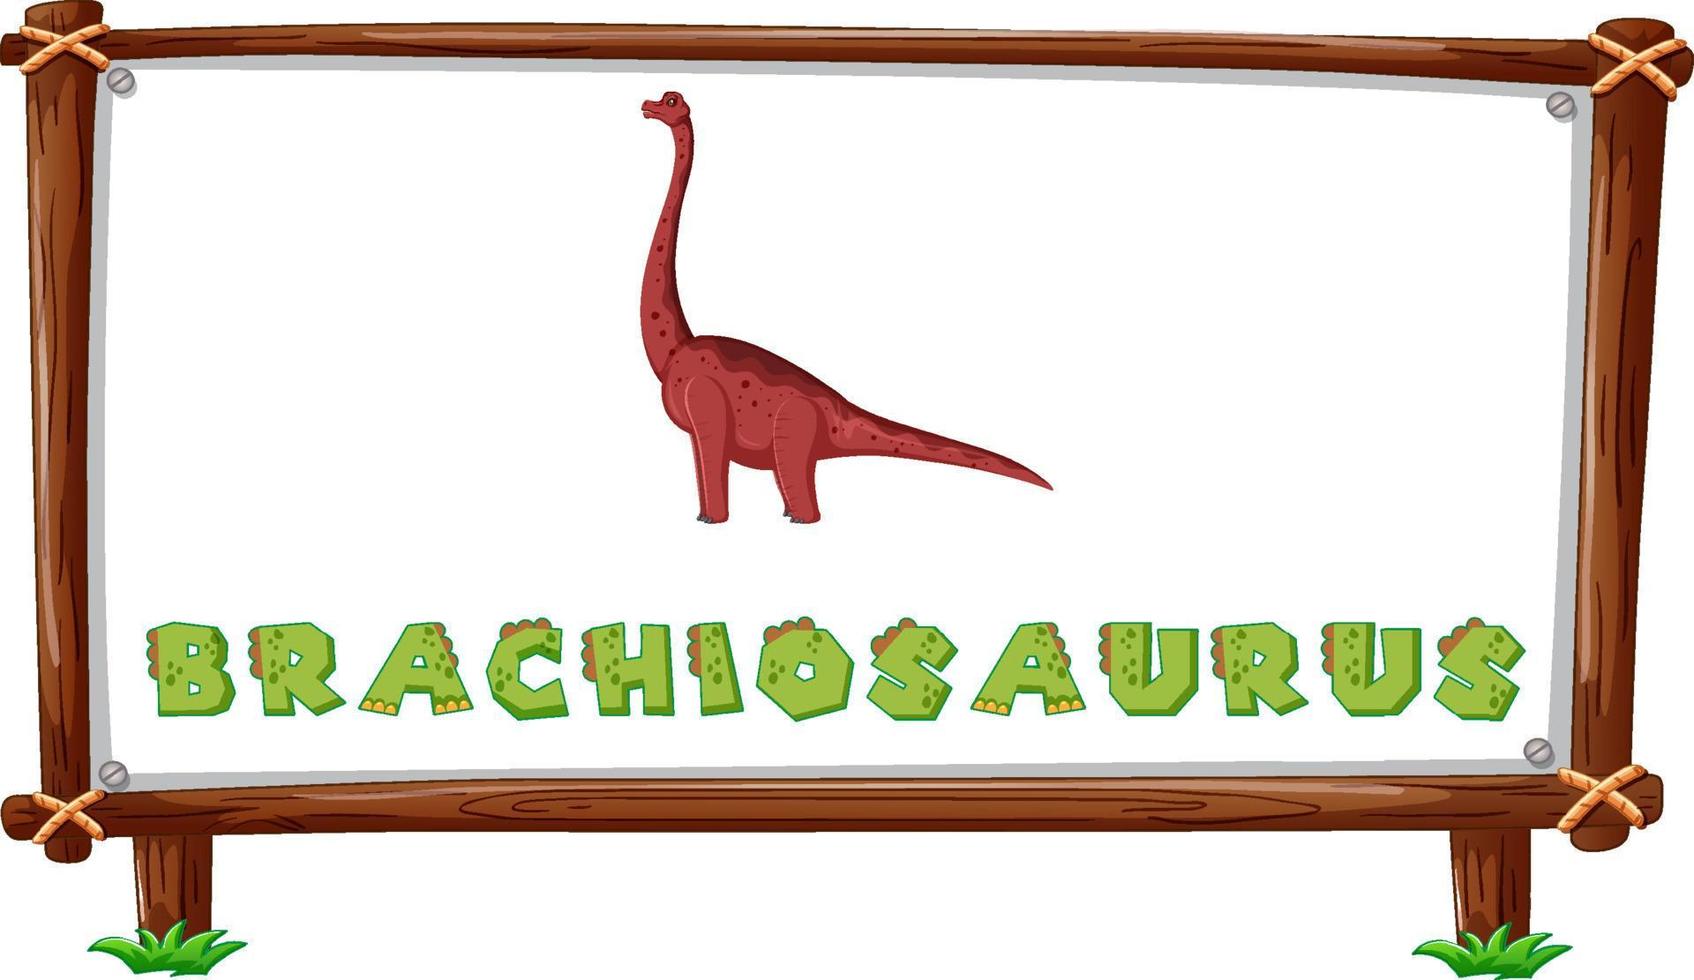 Frame template with dinosaurs and text brachiosaurus design inside vector